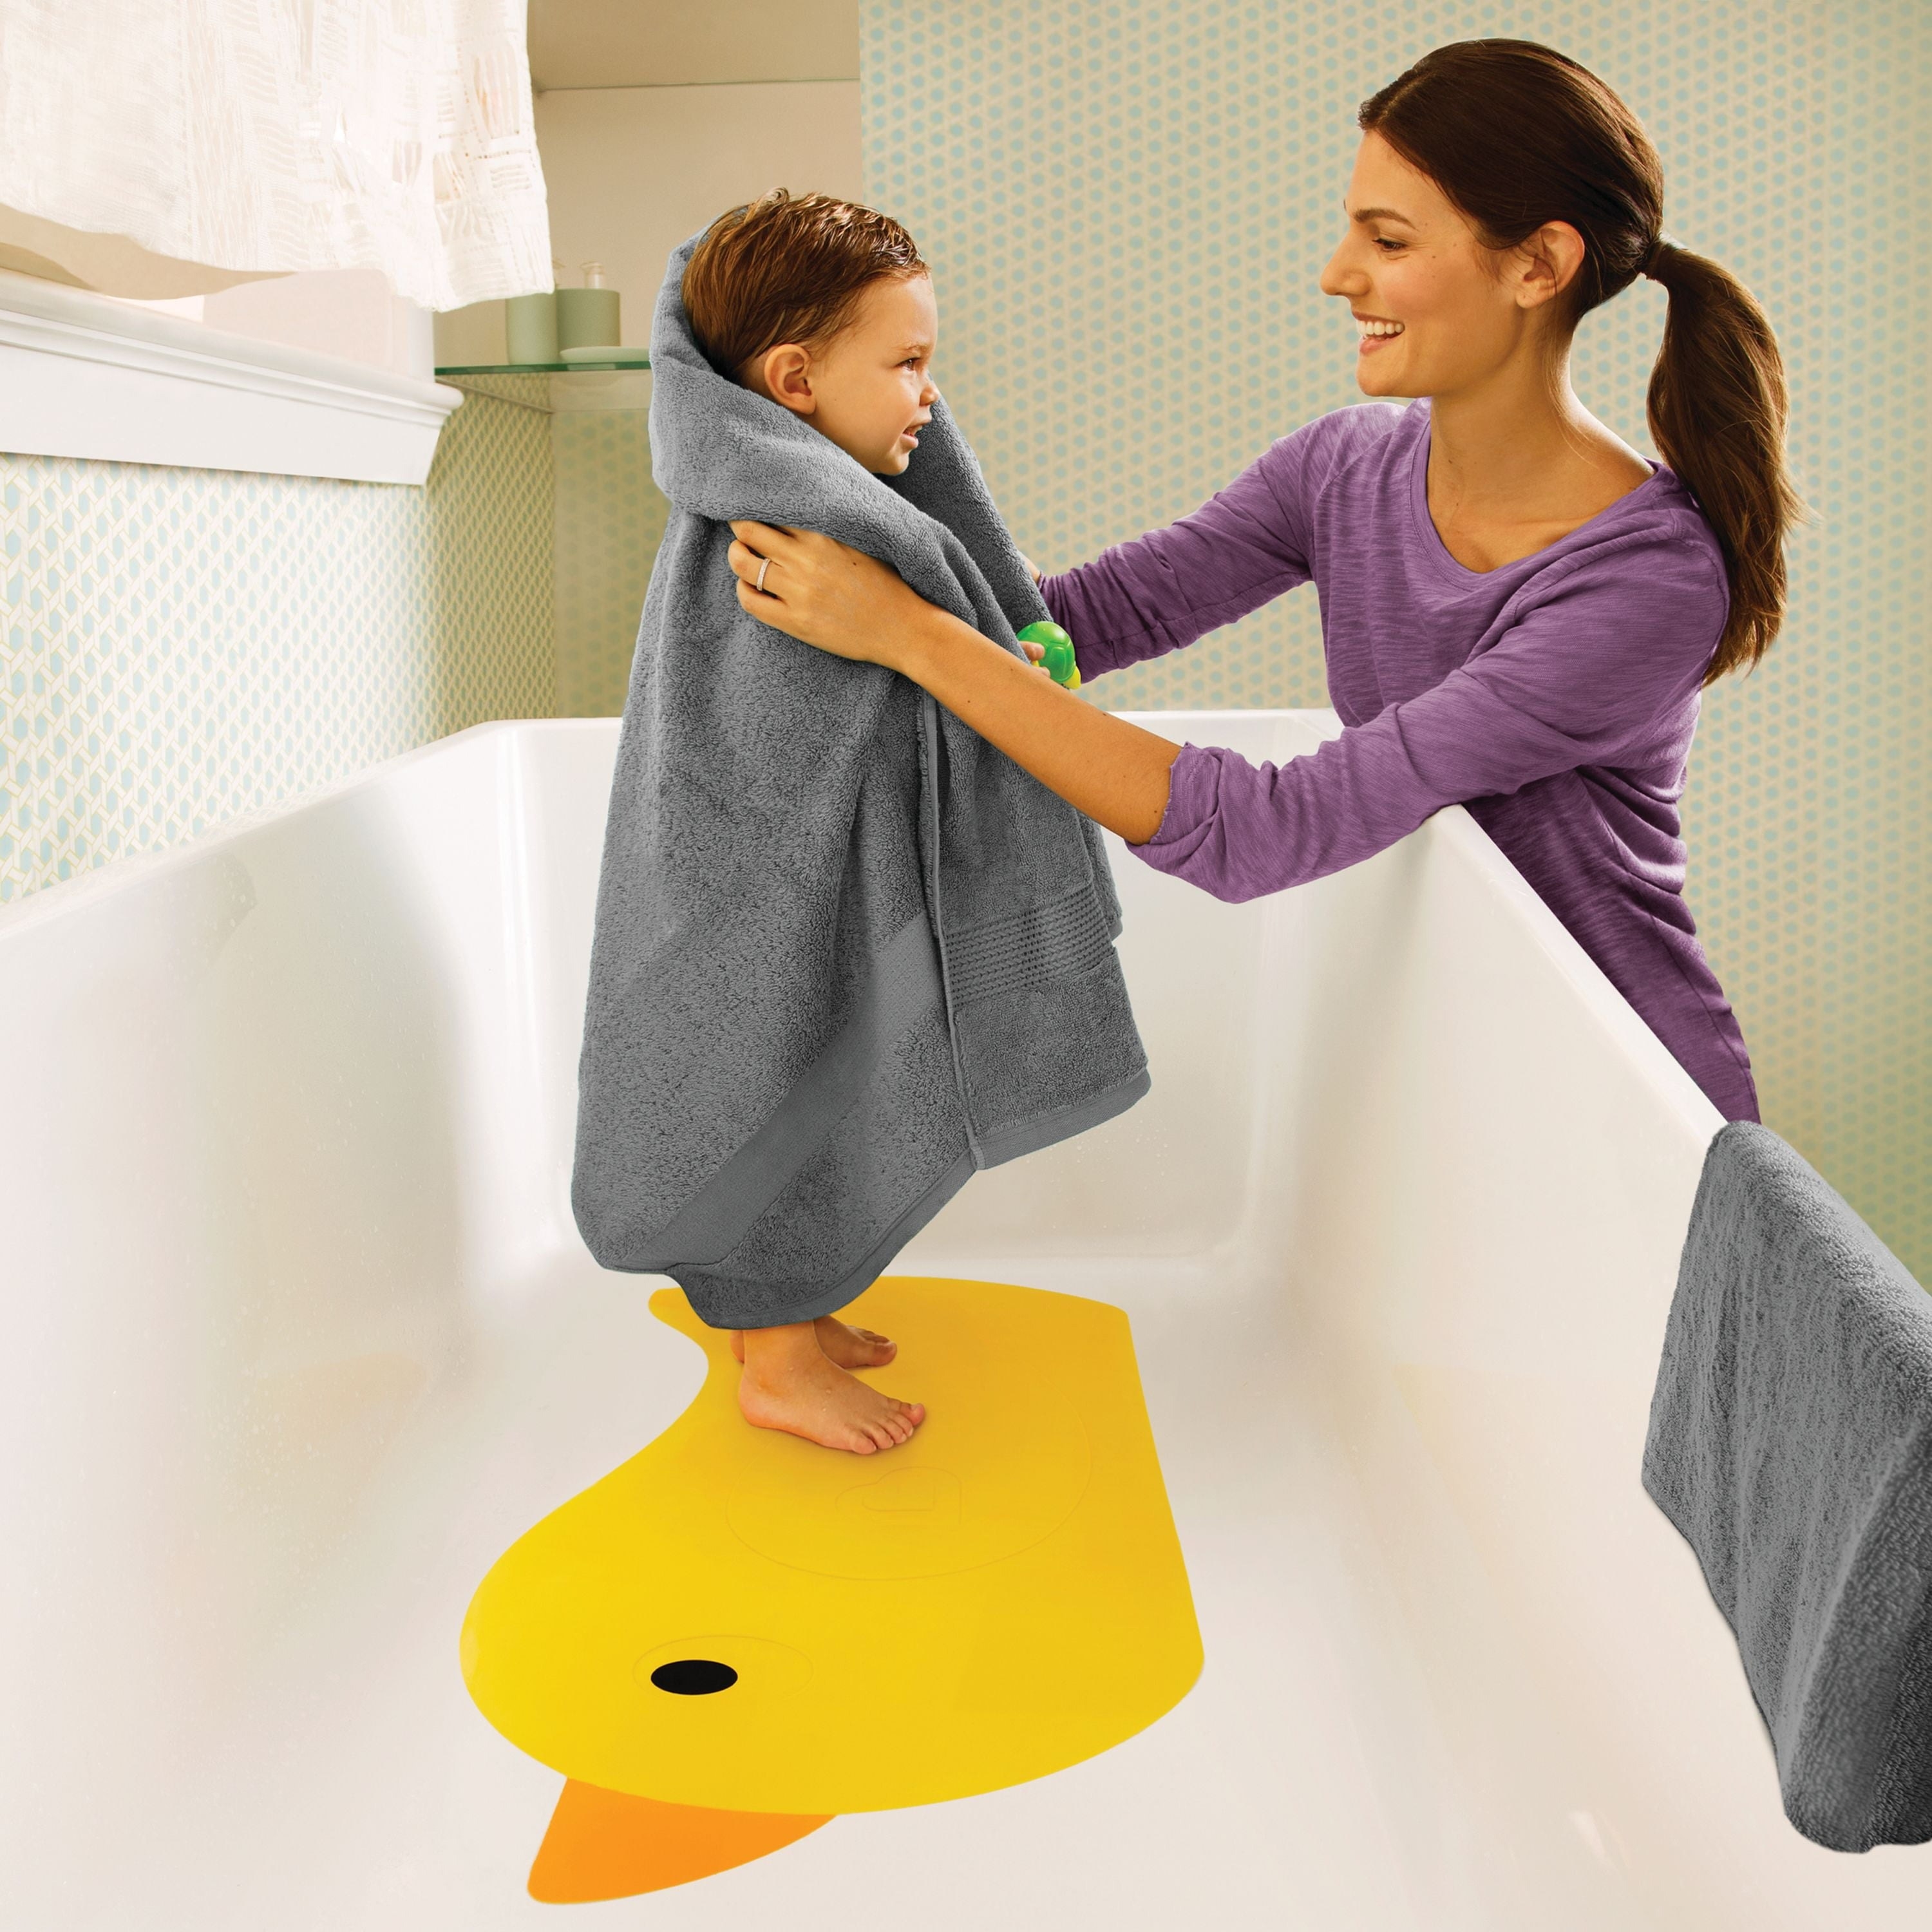 A child being wrapped in a towel by their parent while standing on the bath mat in the tub